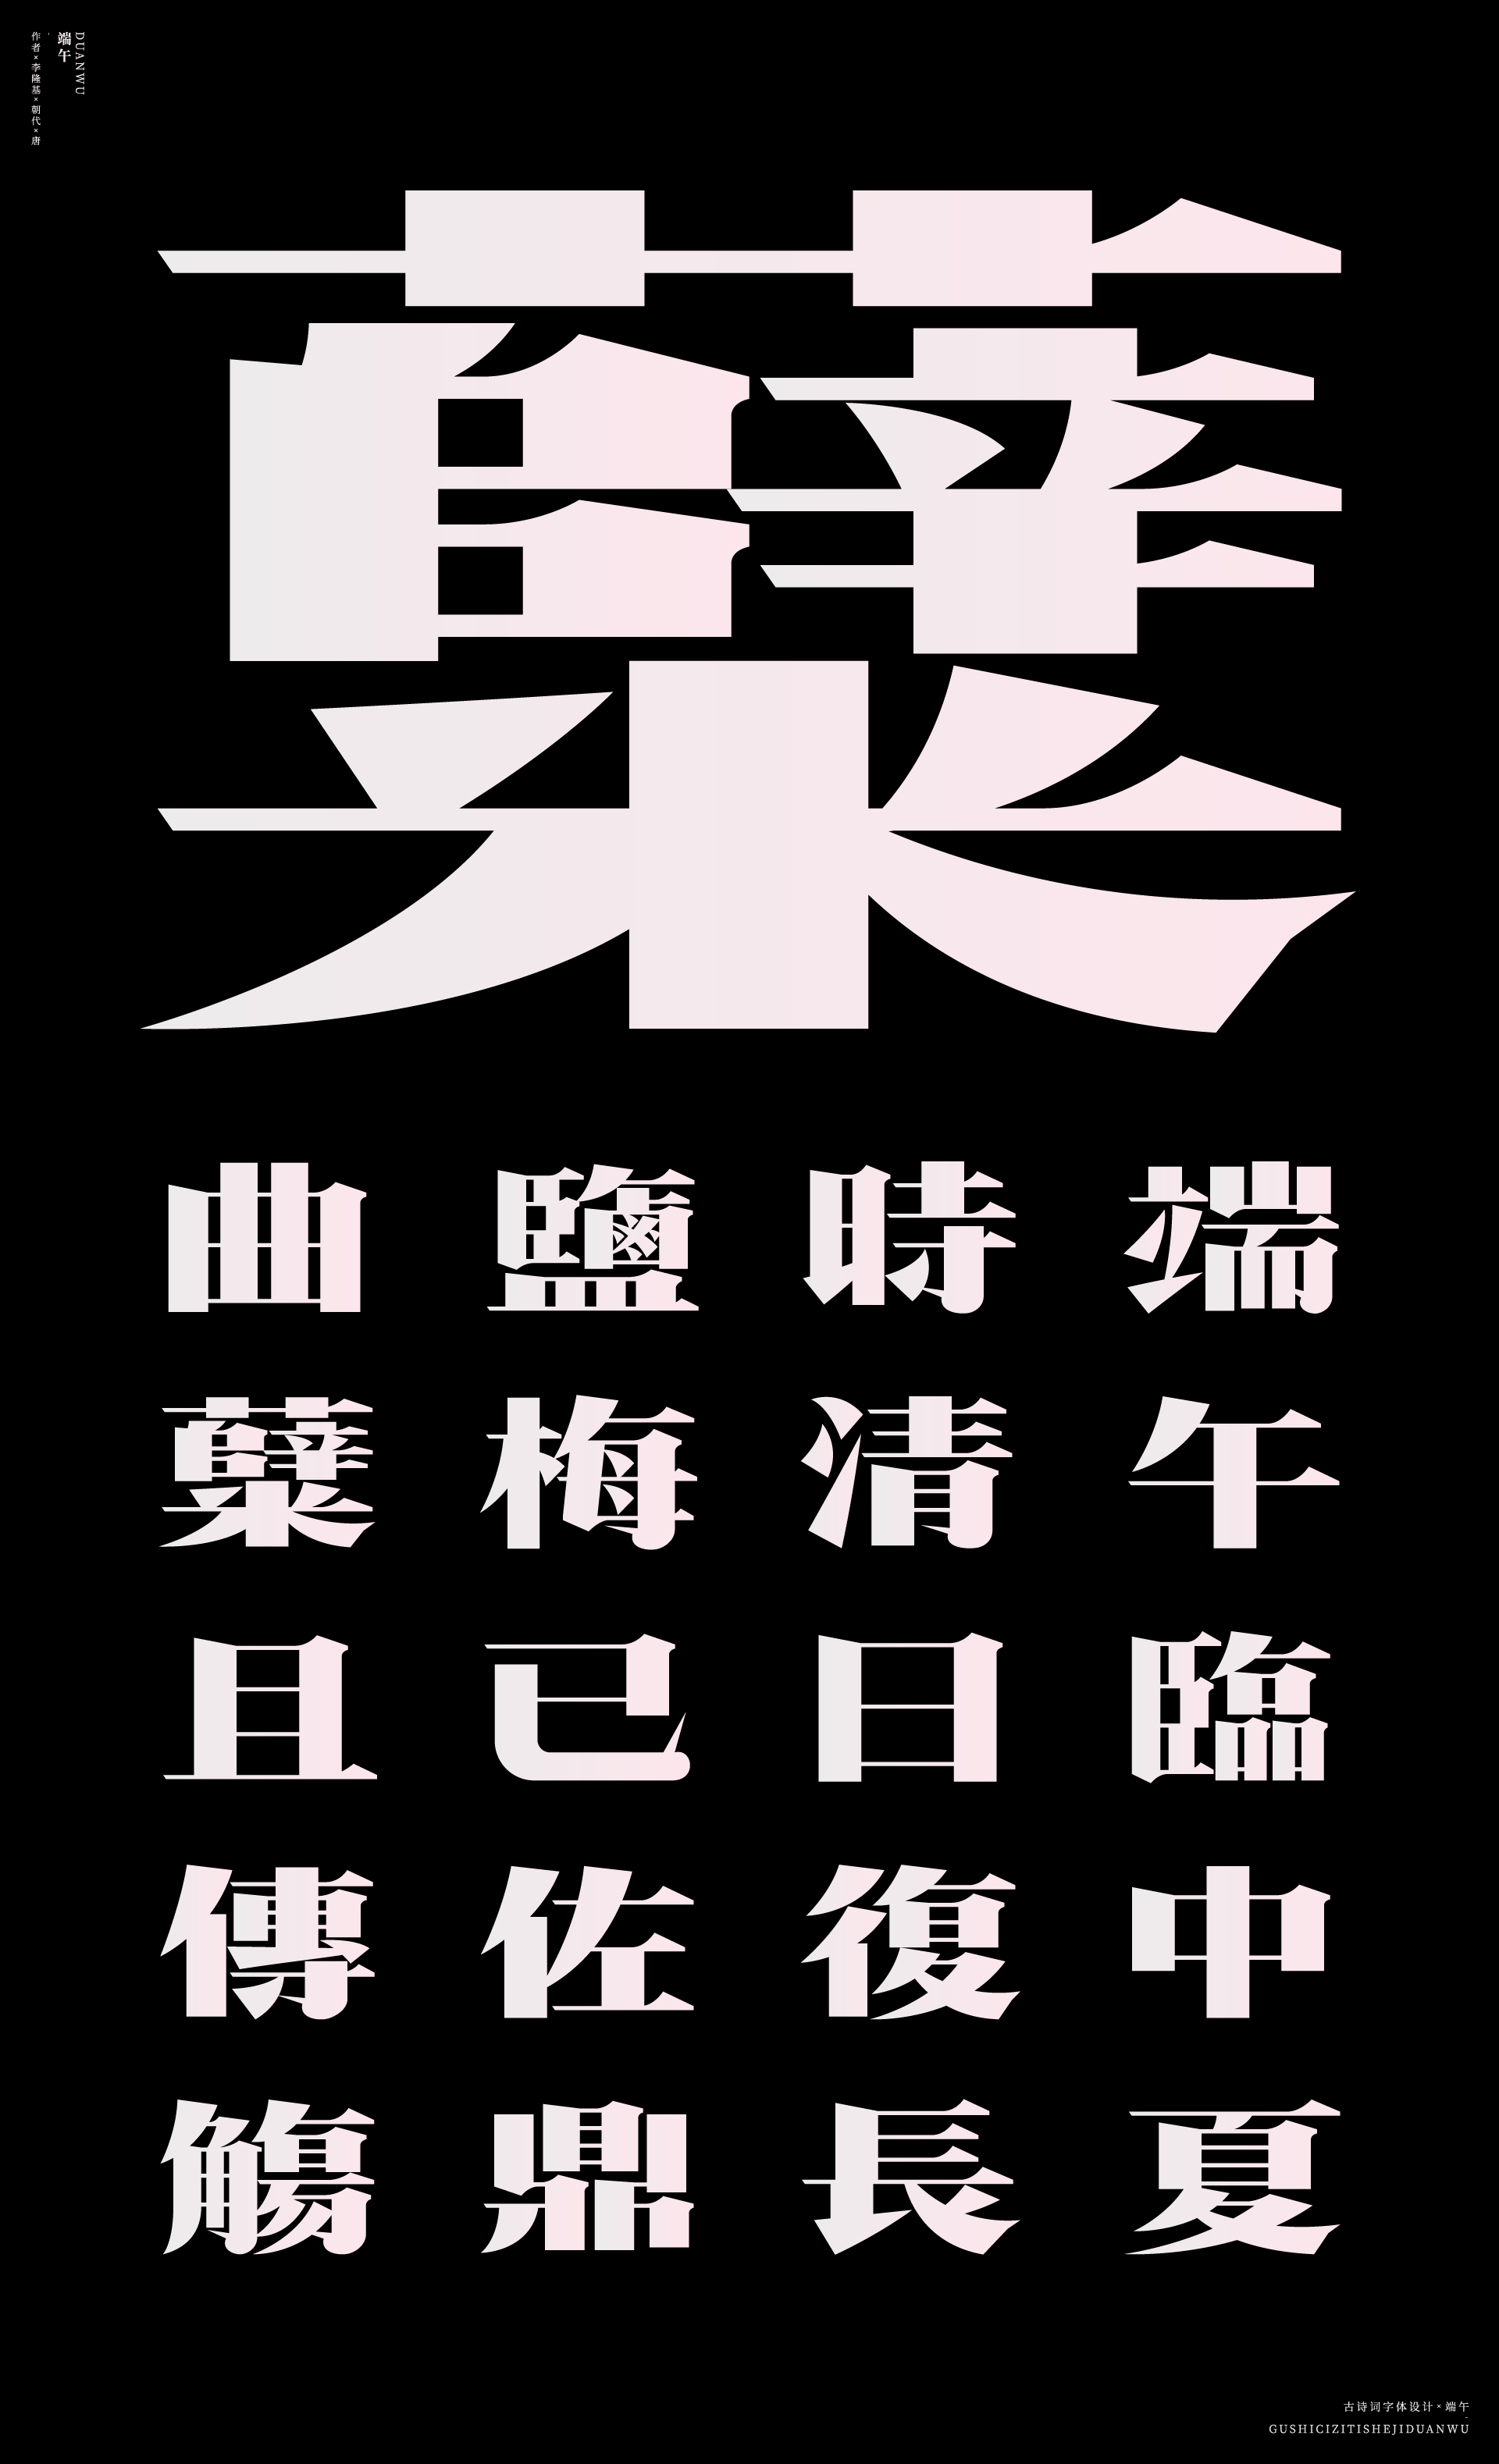 Font design of ancient poetry-Dragon Boat Festival